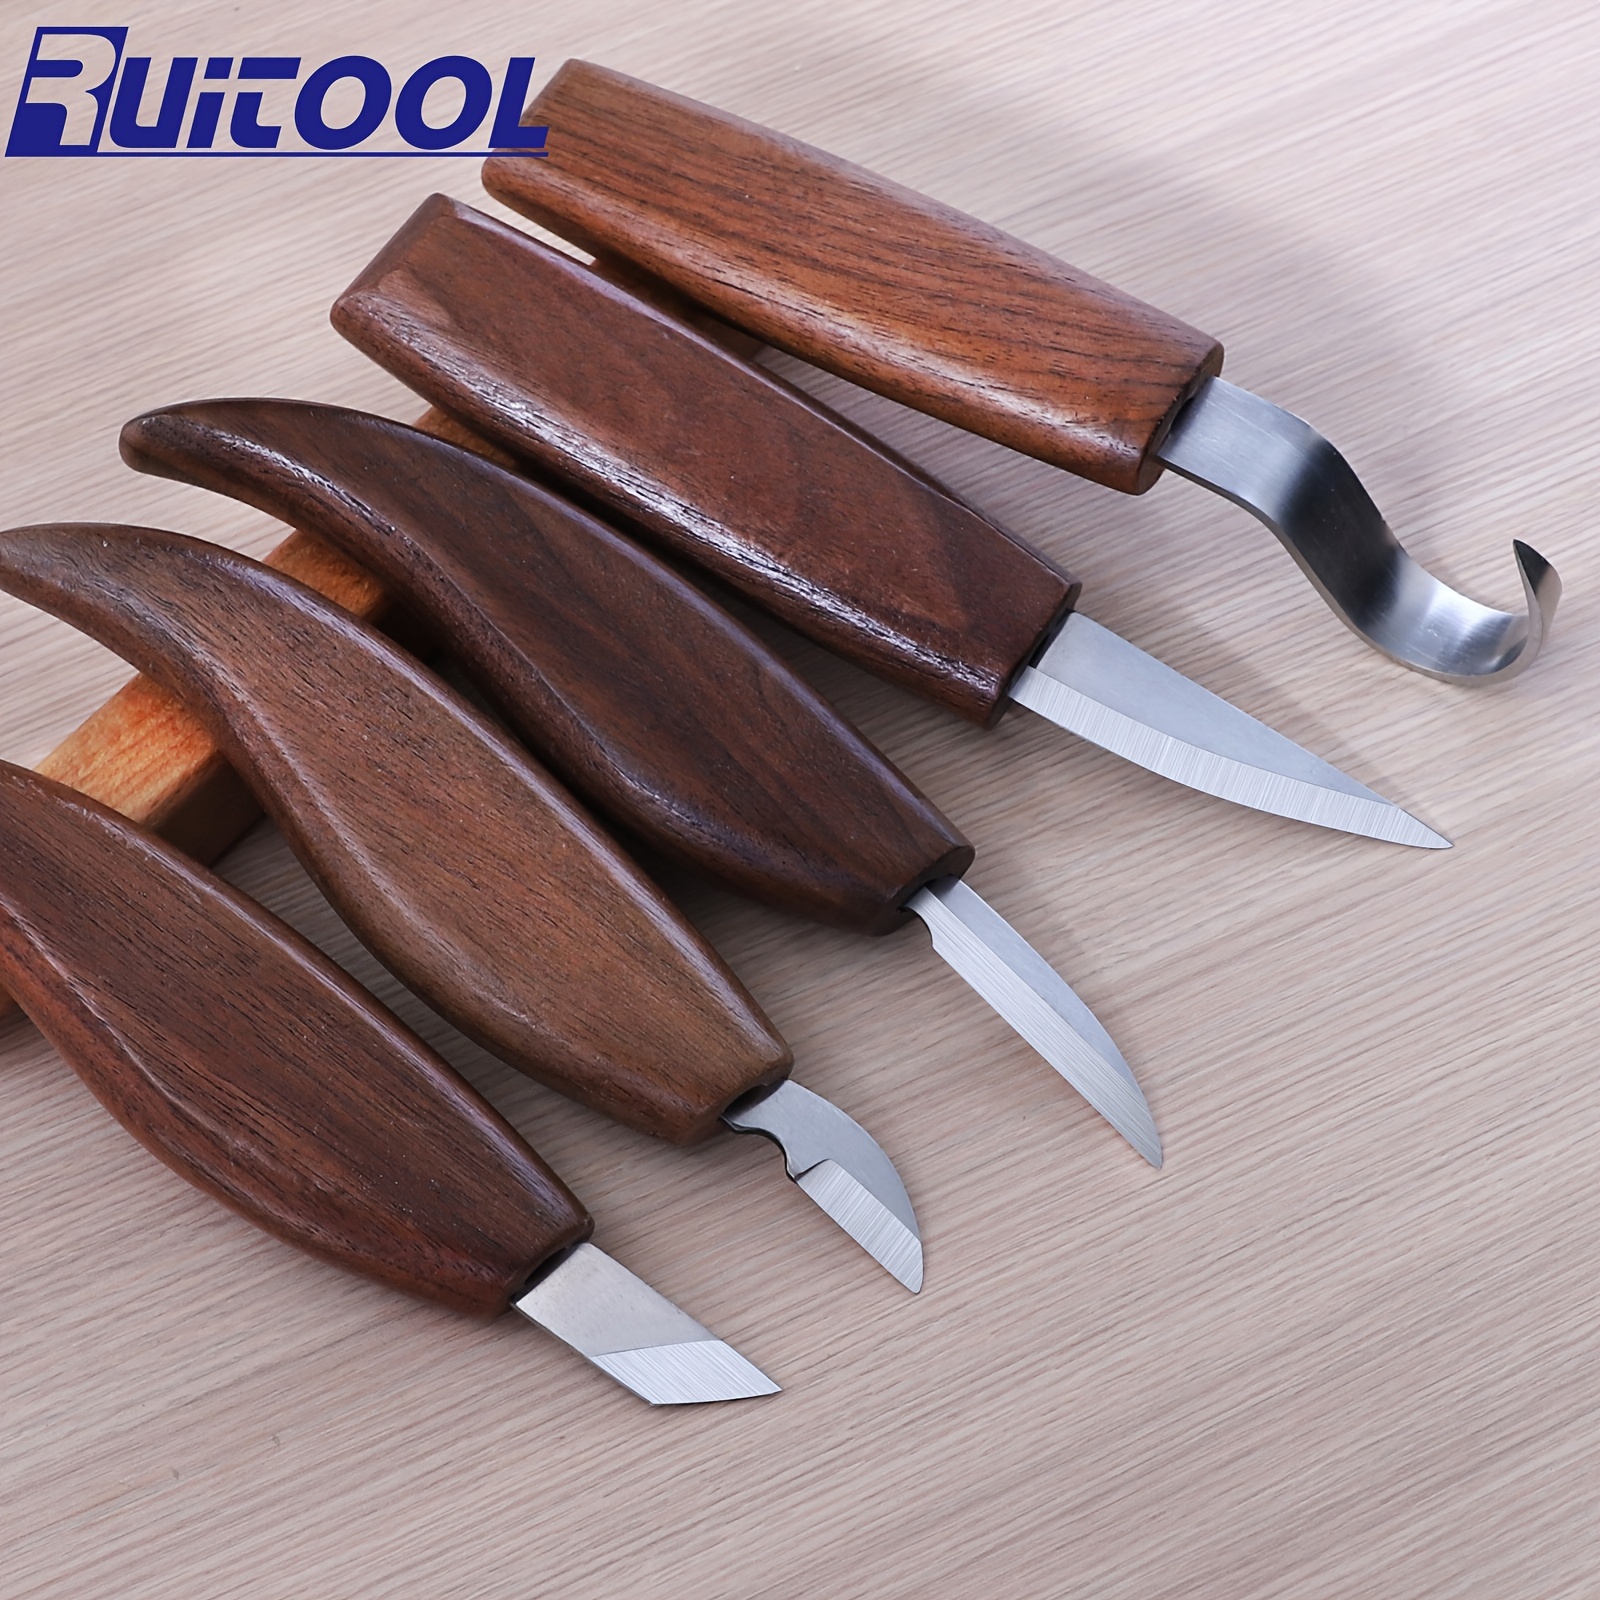 Wood Carving Tools 7 in 1 Wood Carving Kit with Carving Hook Knife Wood  Whittling Knife Chip Carving Knife Gloves Carving Knife Sharpener for  Beginners Woodworking kit Brown 7 in 1